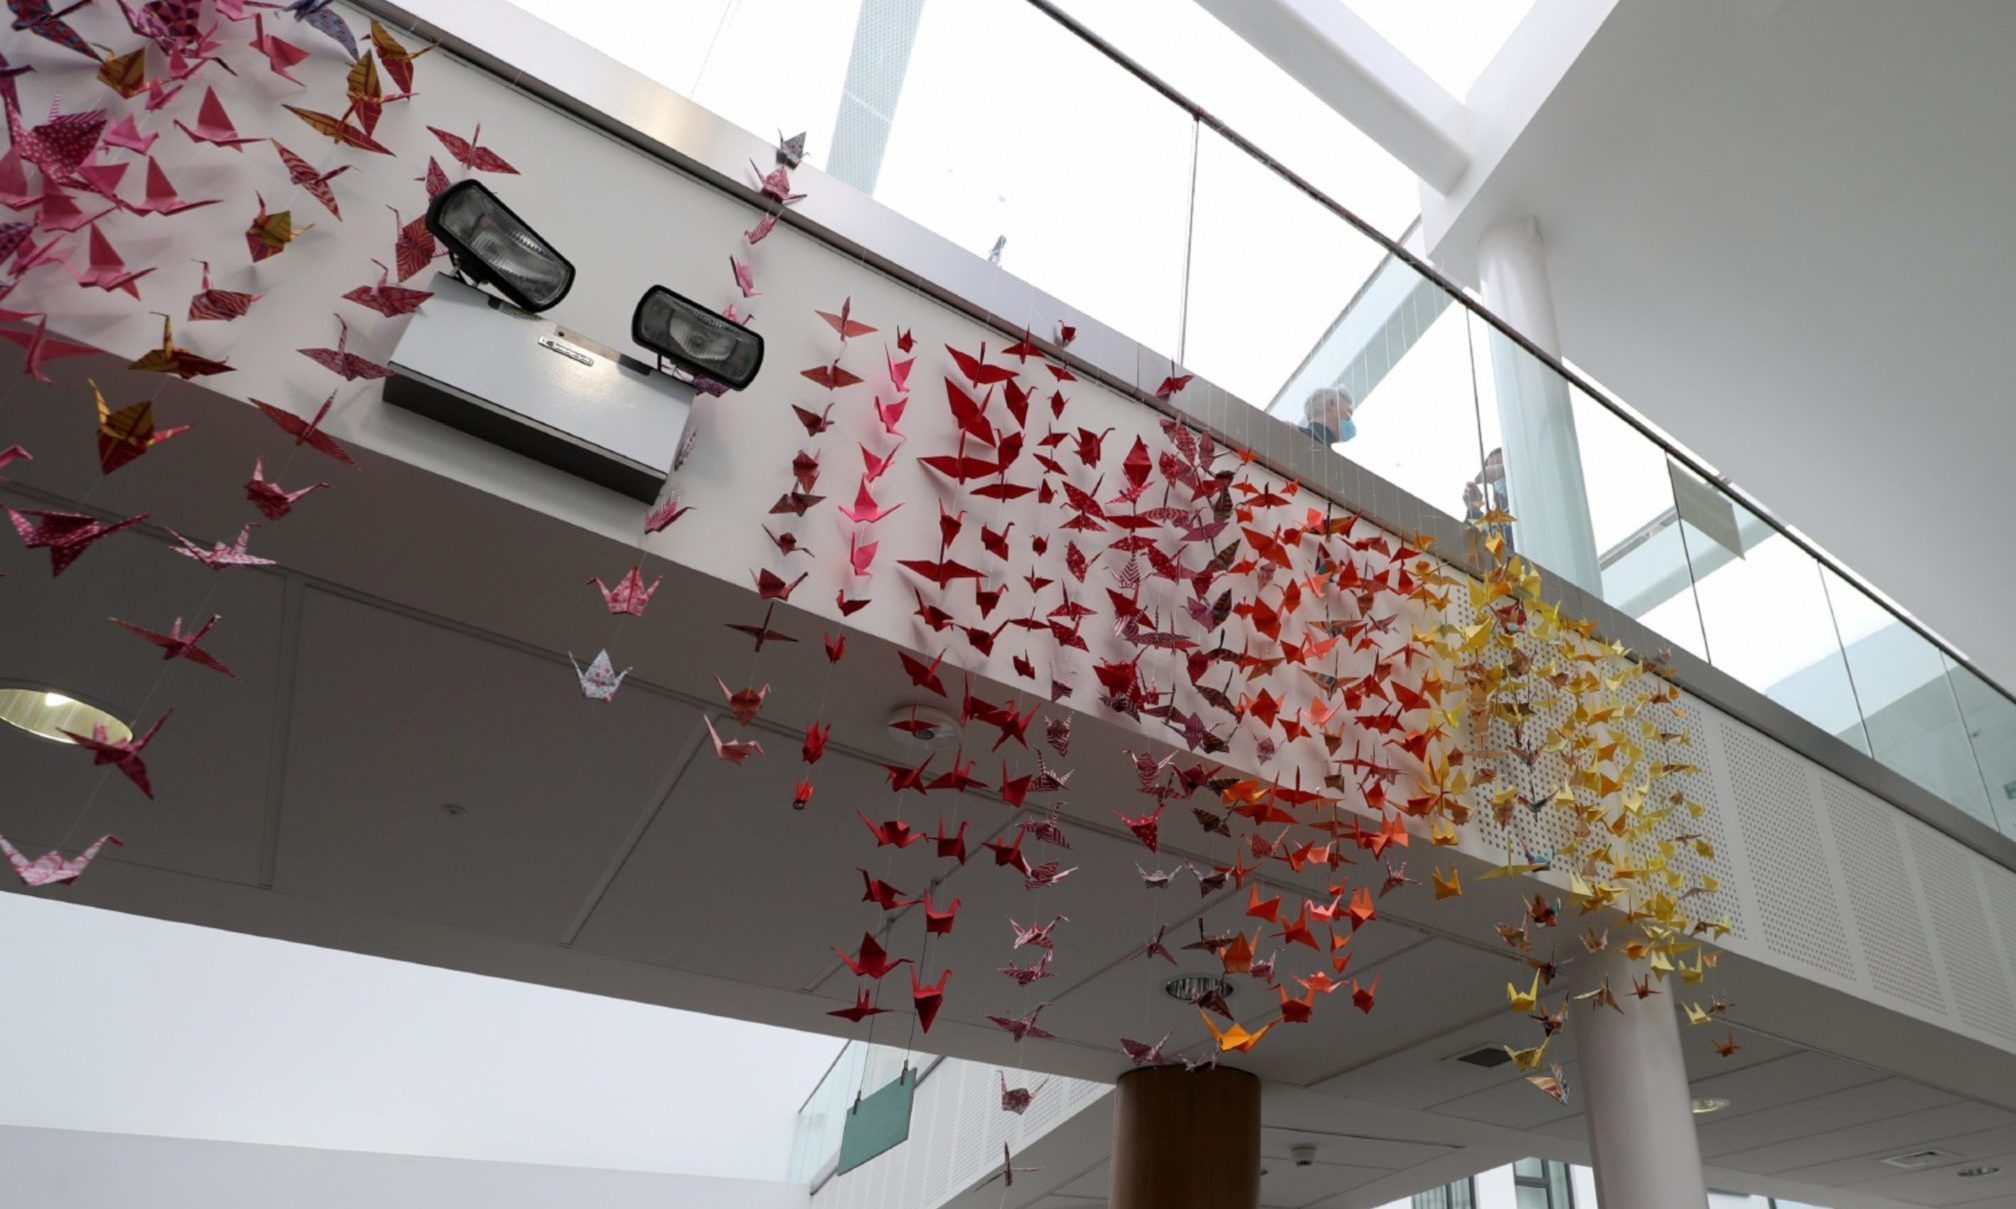 The origami cranes are on display at Frederick Street Health Village.